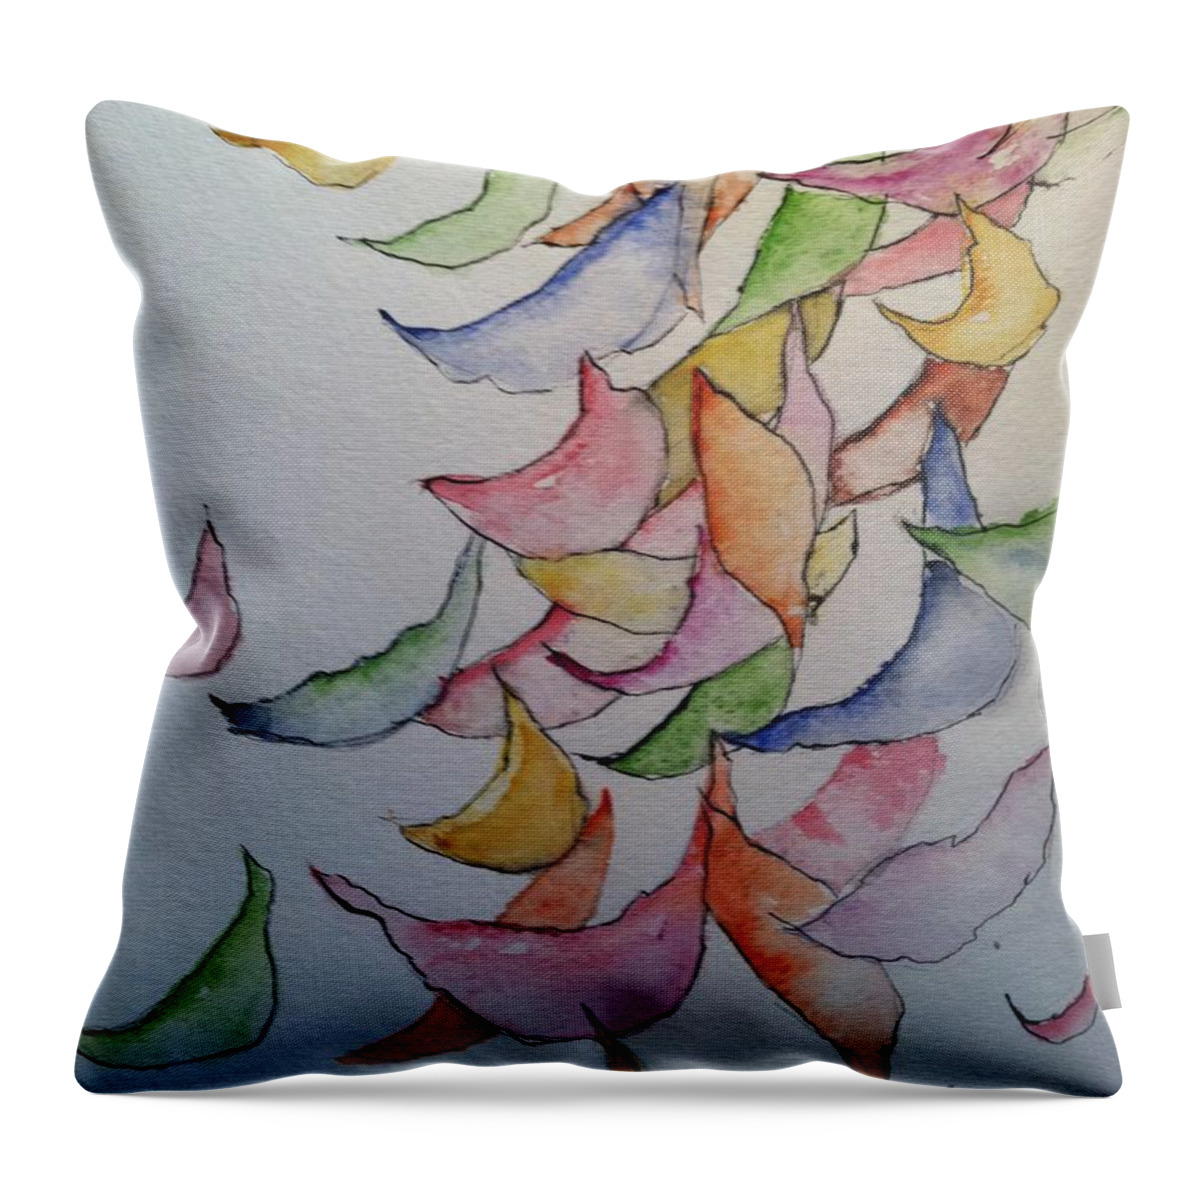 Orchards Throw Pillow featuring the painting Falling Into Place #3 by Sherry Harradence